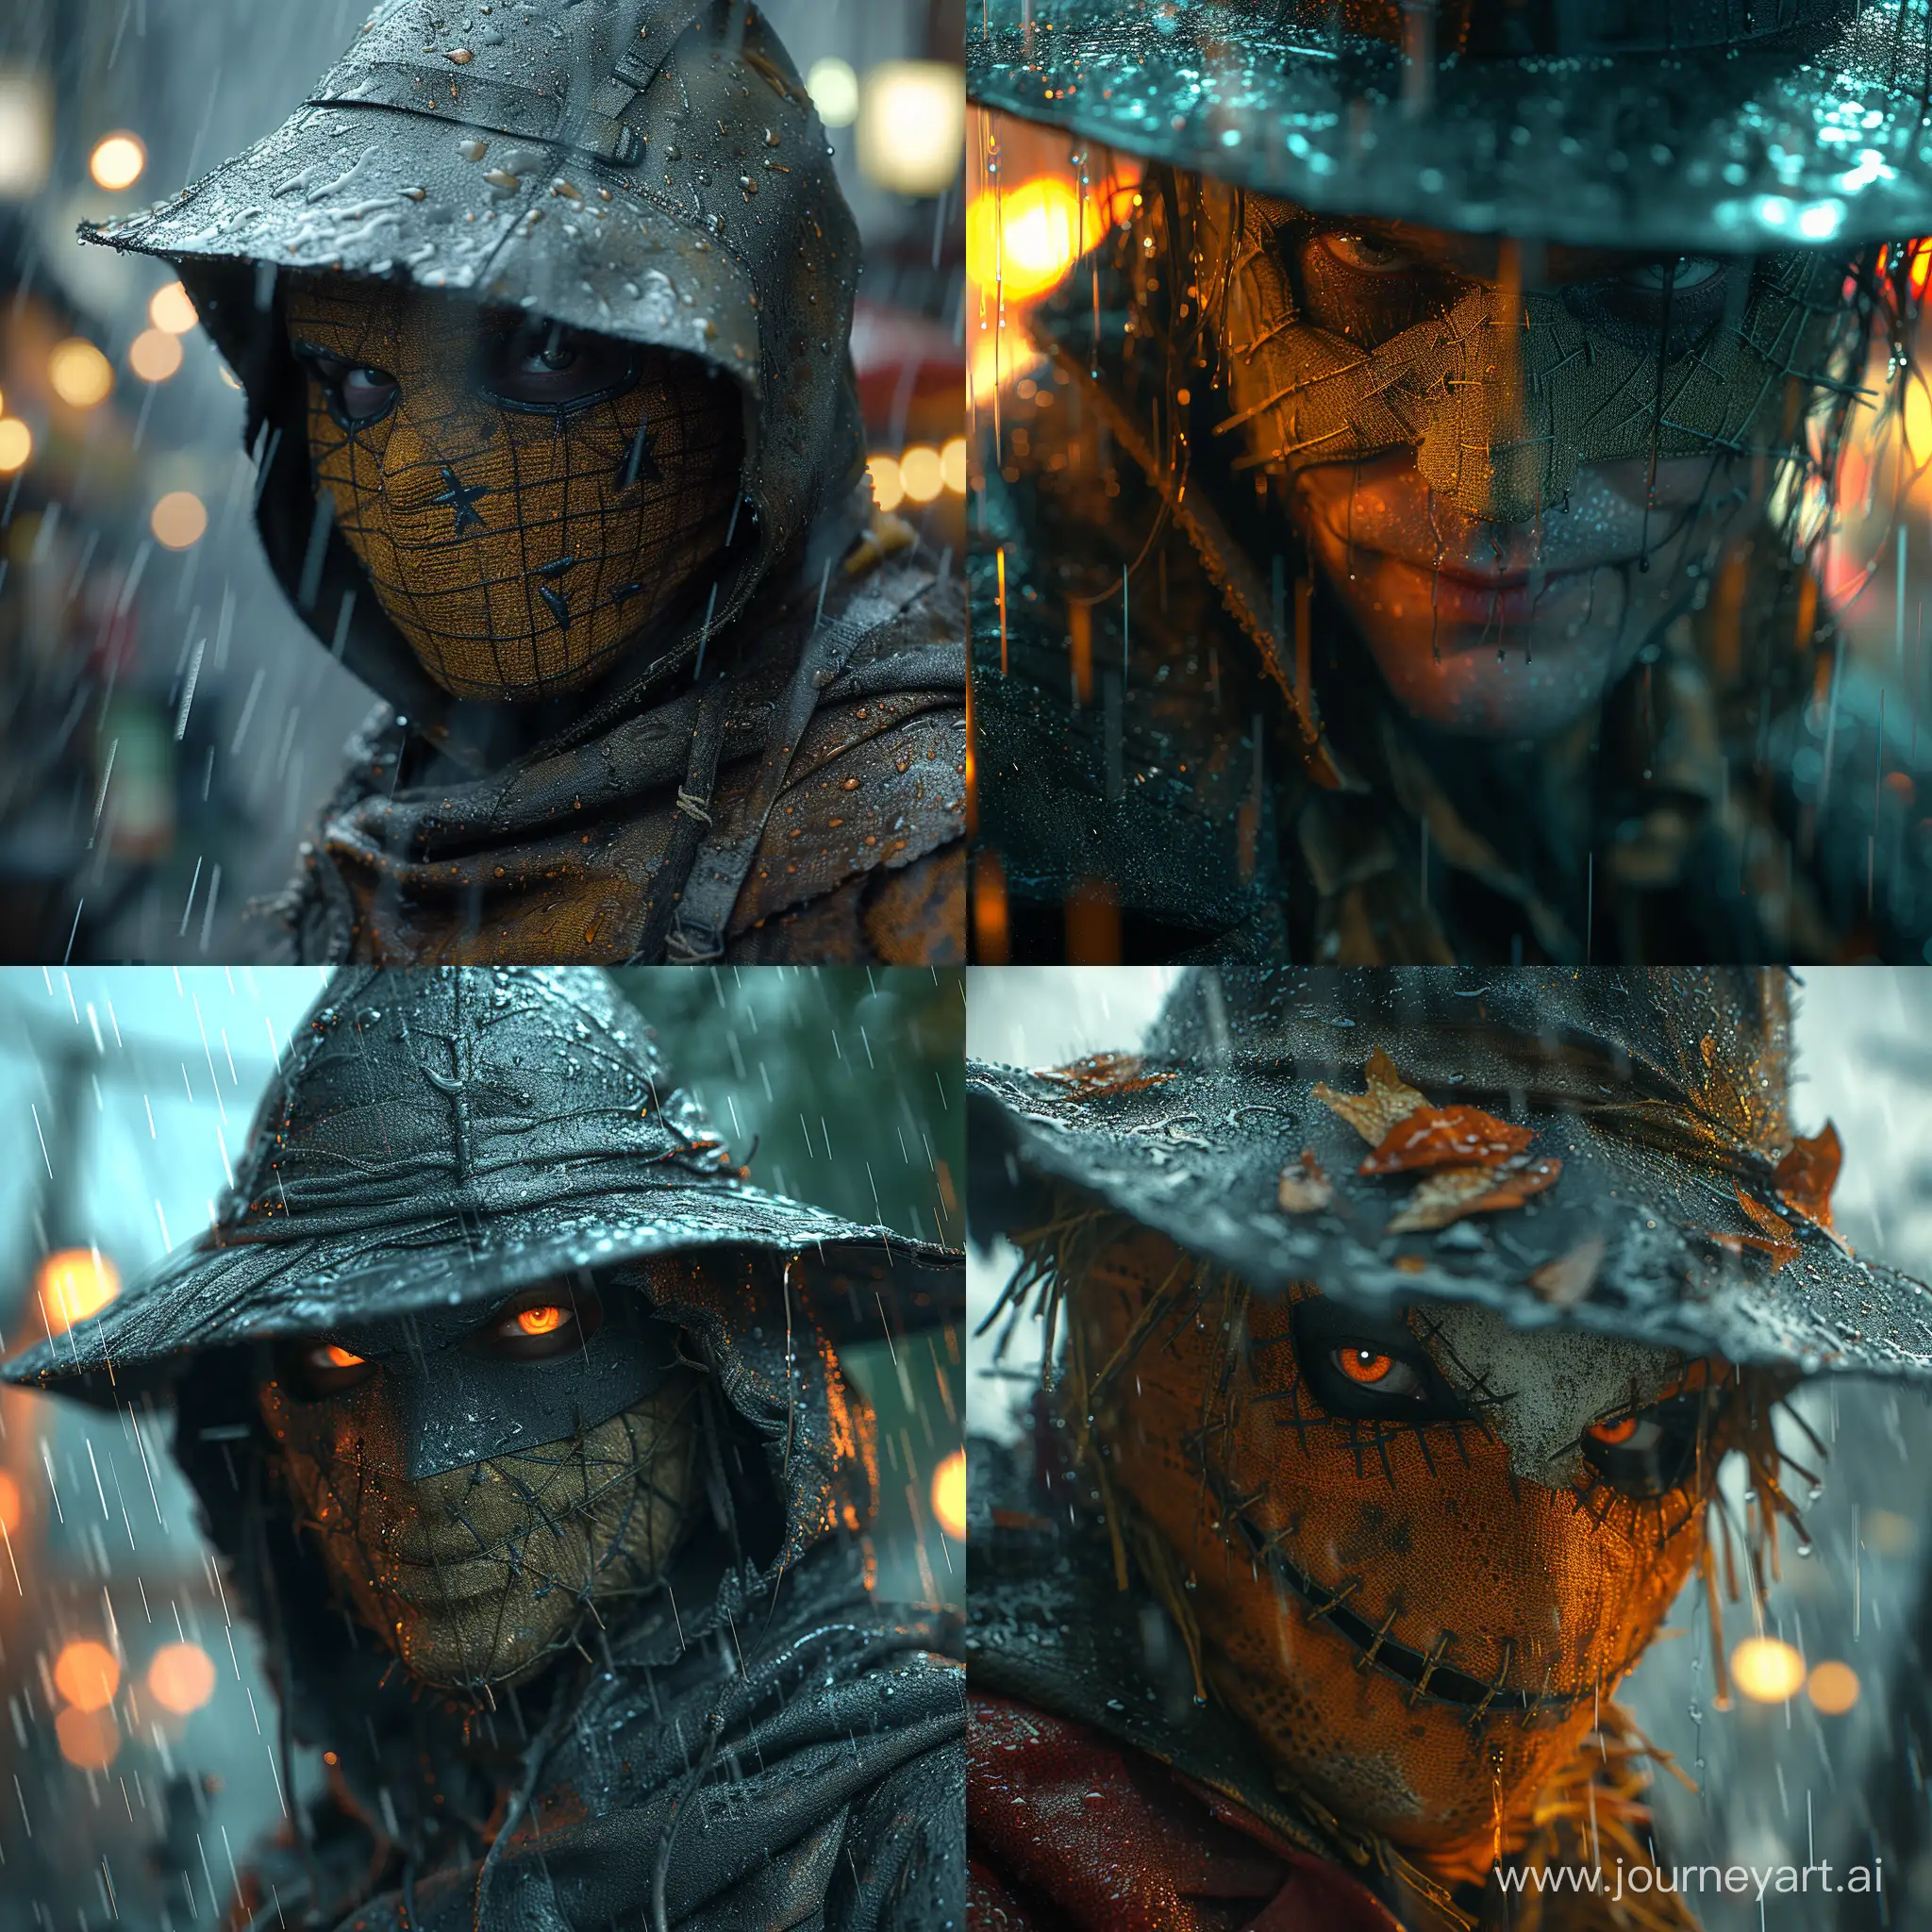 Create a realistic and dynamic image of the Scarecrow in Gotham City, with a close-up depth of field, set in the rain. The image should capture the essence of Gotham City's atmosphere and the Scarecrow's character, incorporating a stylized approach. Pay attention to detail and realism, and ensure that the image conveys a sense of drama and intrigue --stylize 750 --v 6